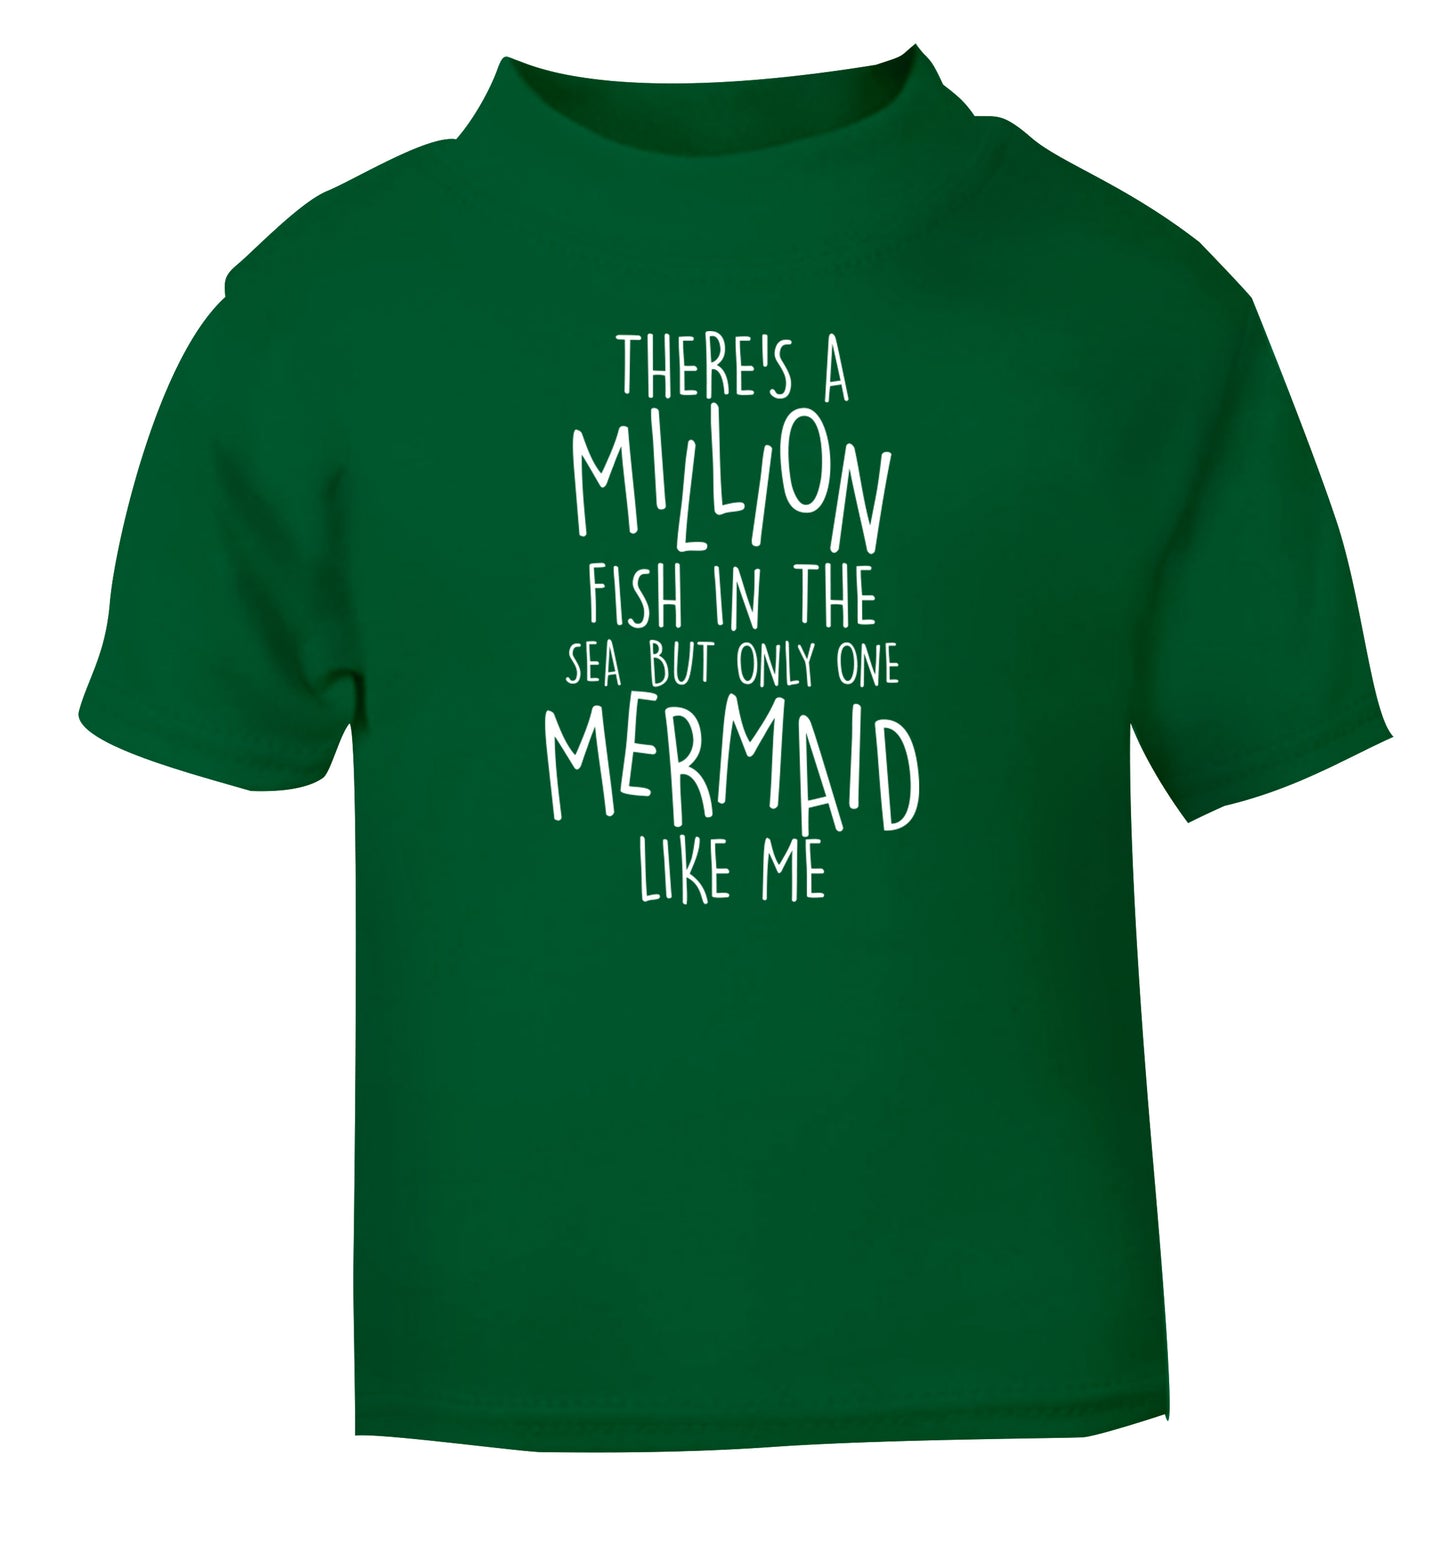 There's a million fish in the sea but only one mermaid like me green Baby Toddler Tshirt 2 Years